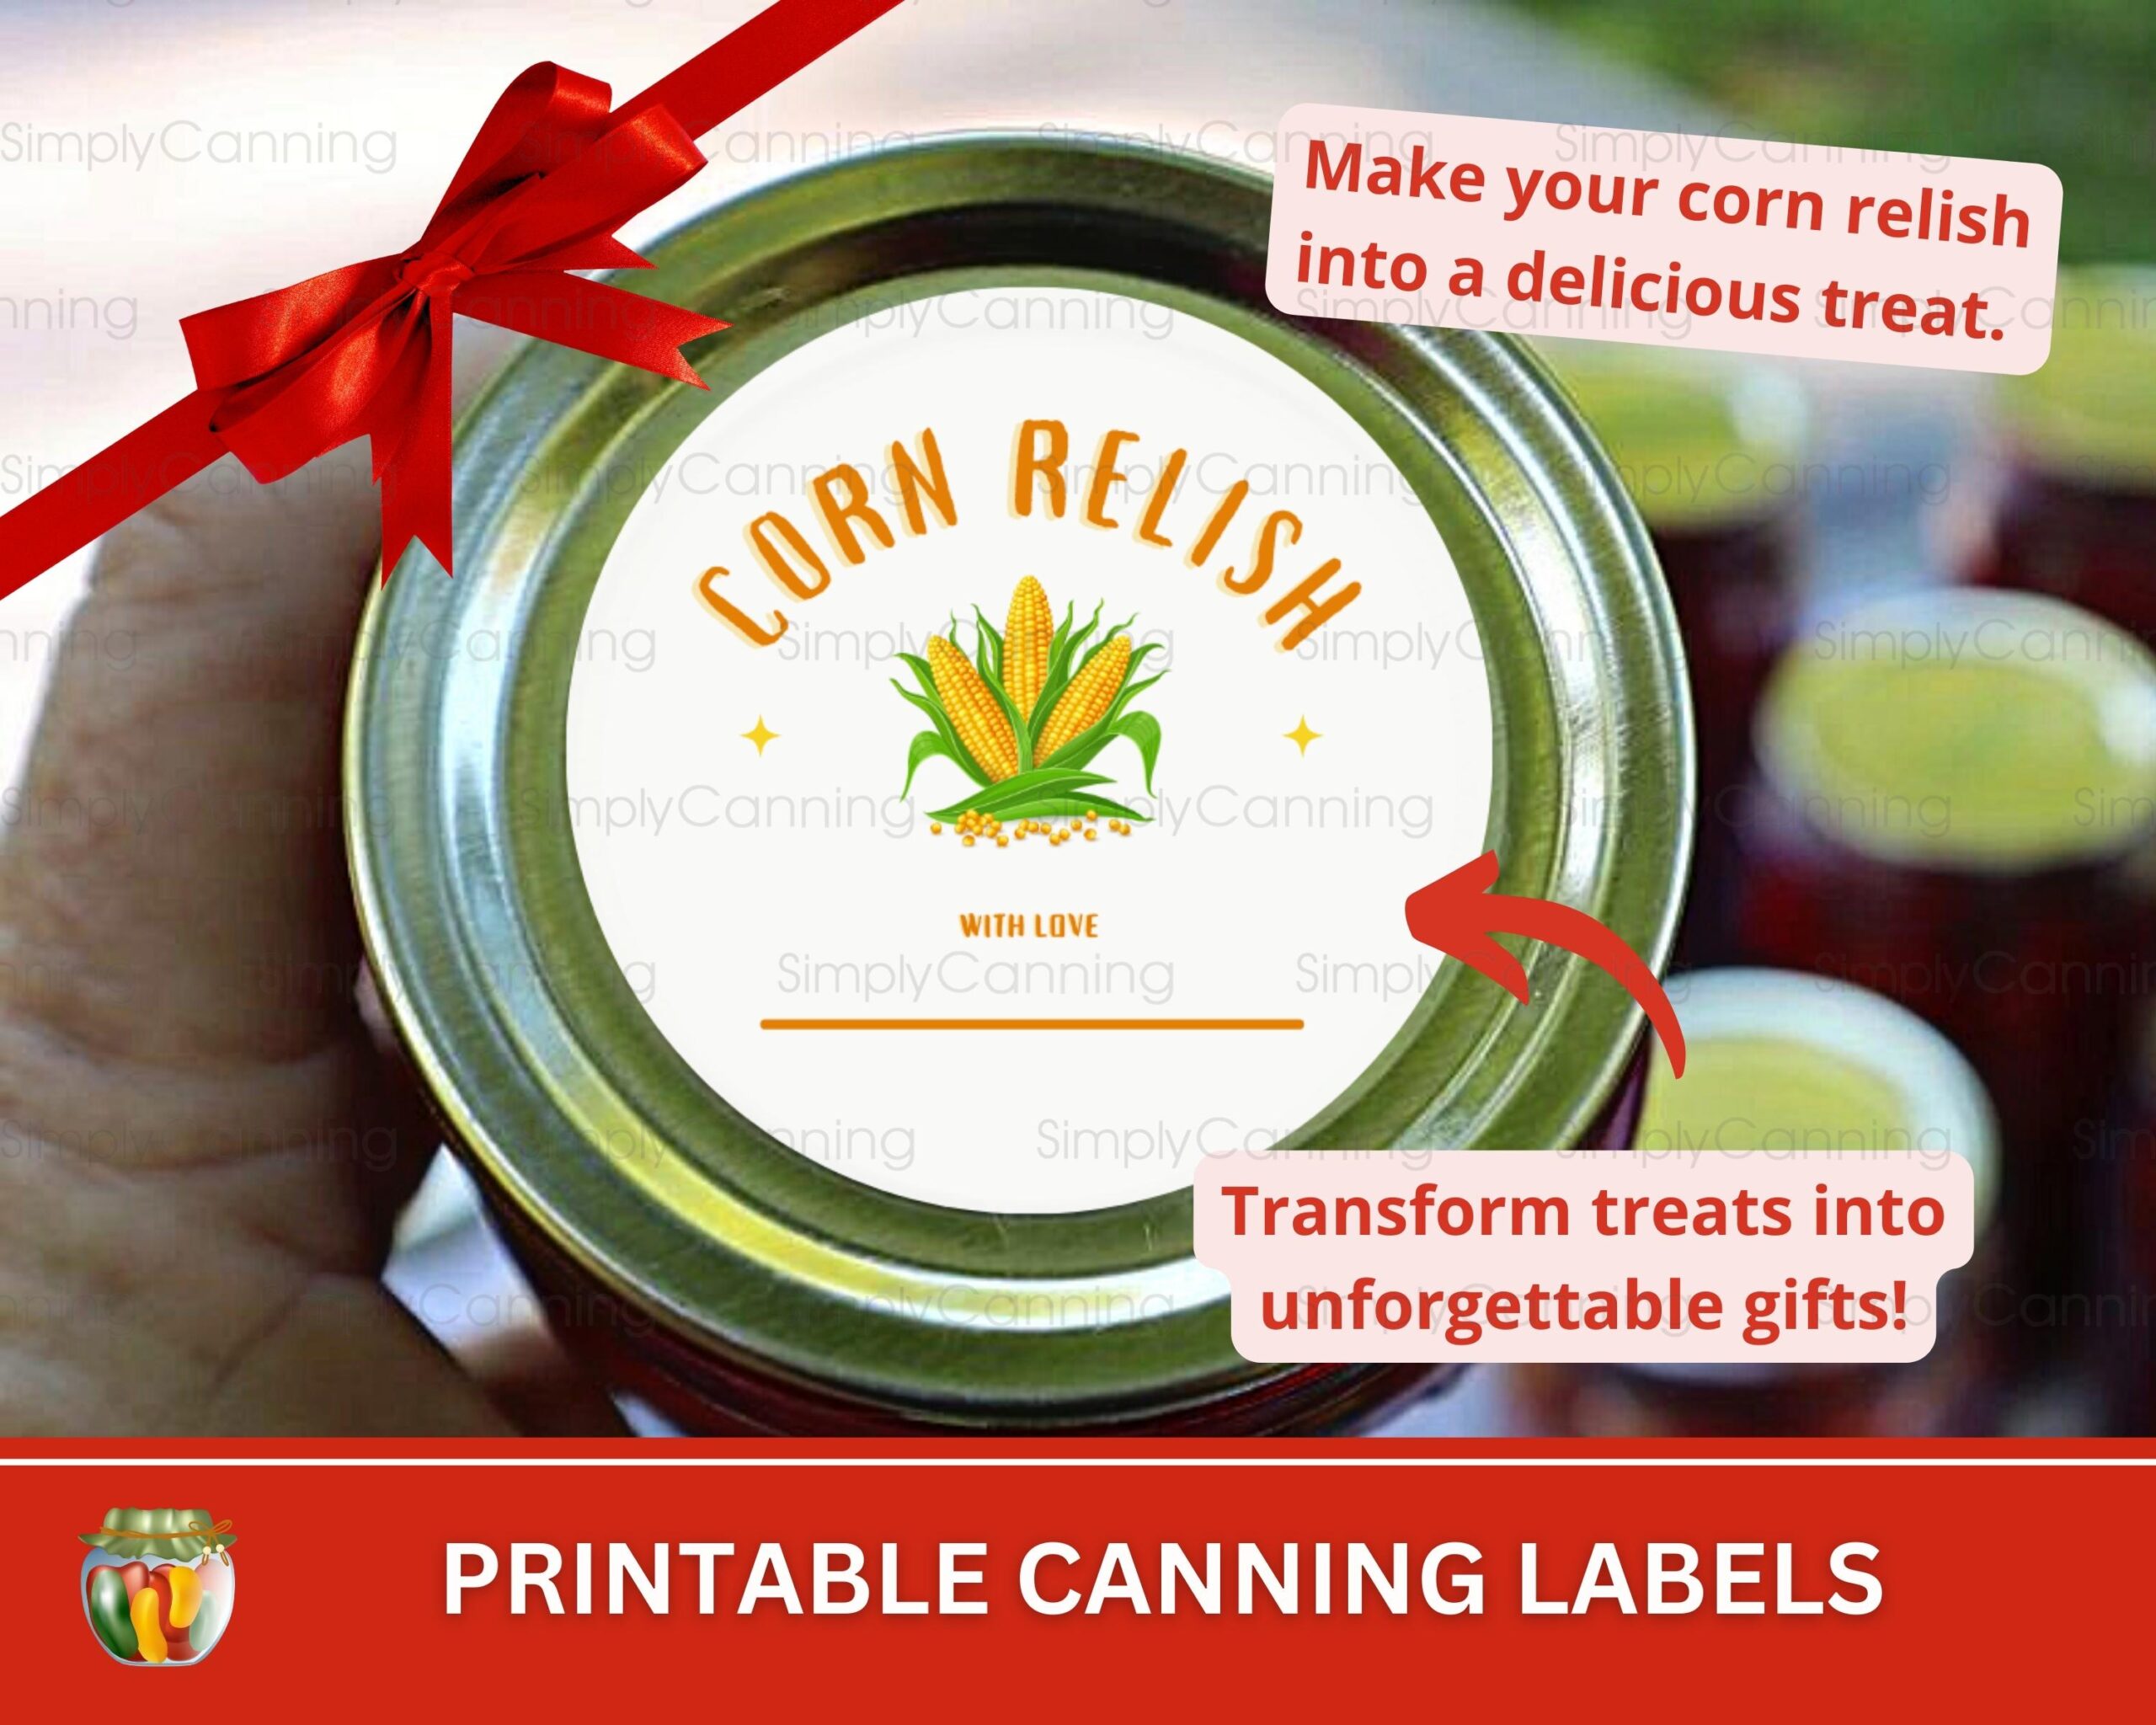 Image of corn relish canning label, links to printable canning labels to purchase.